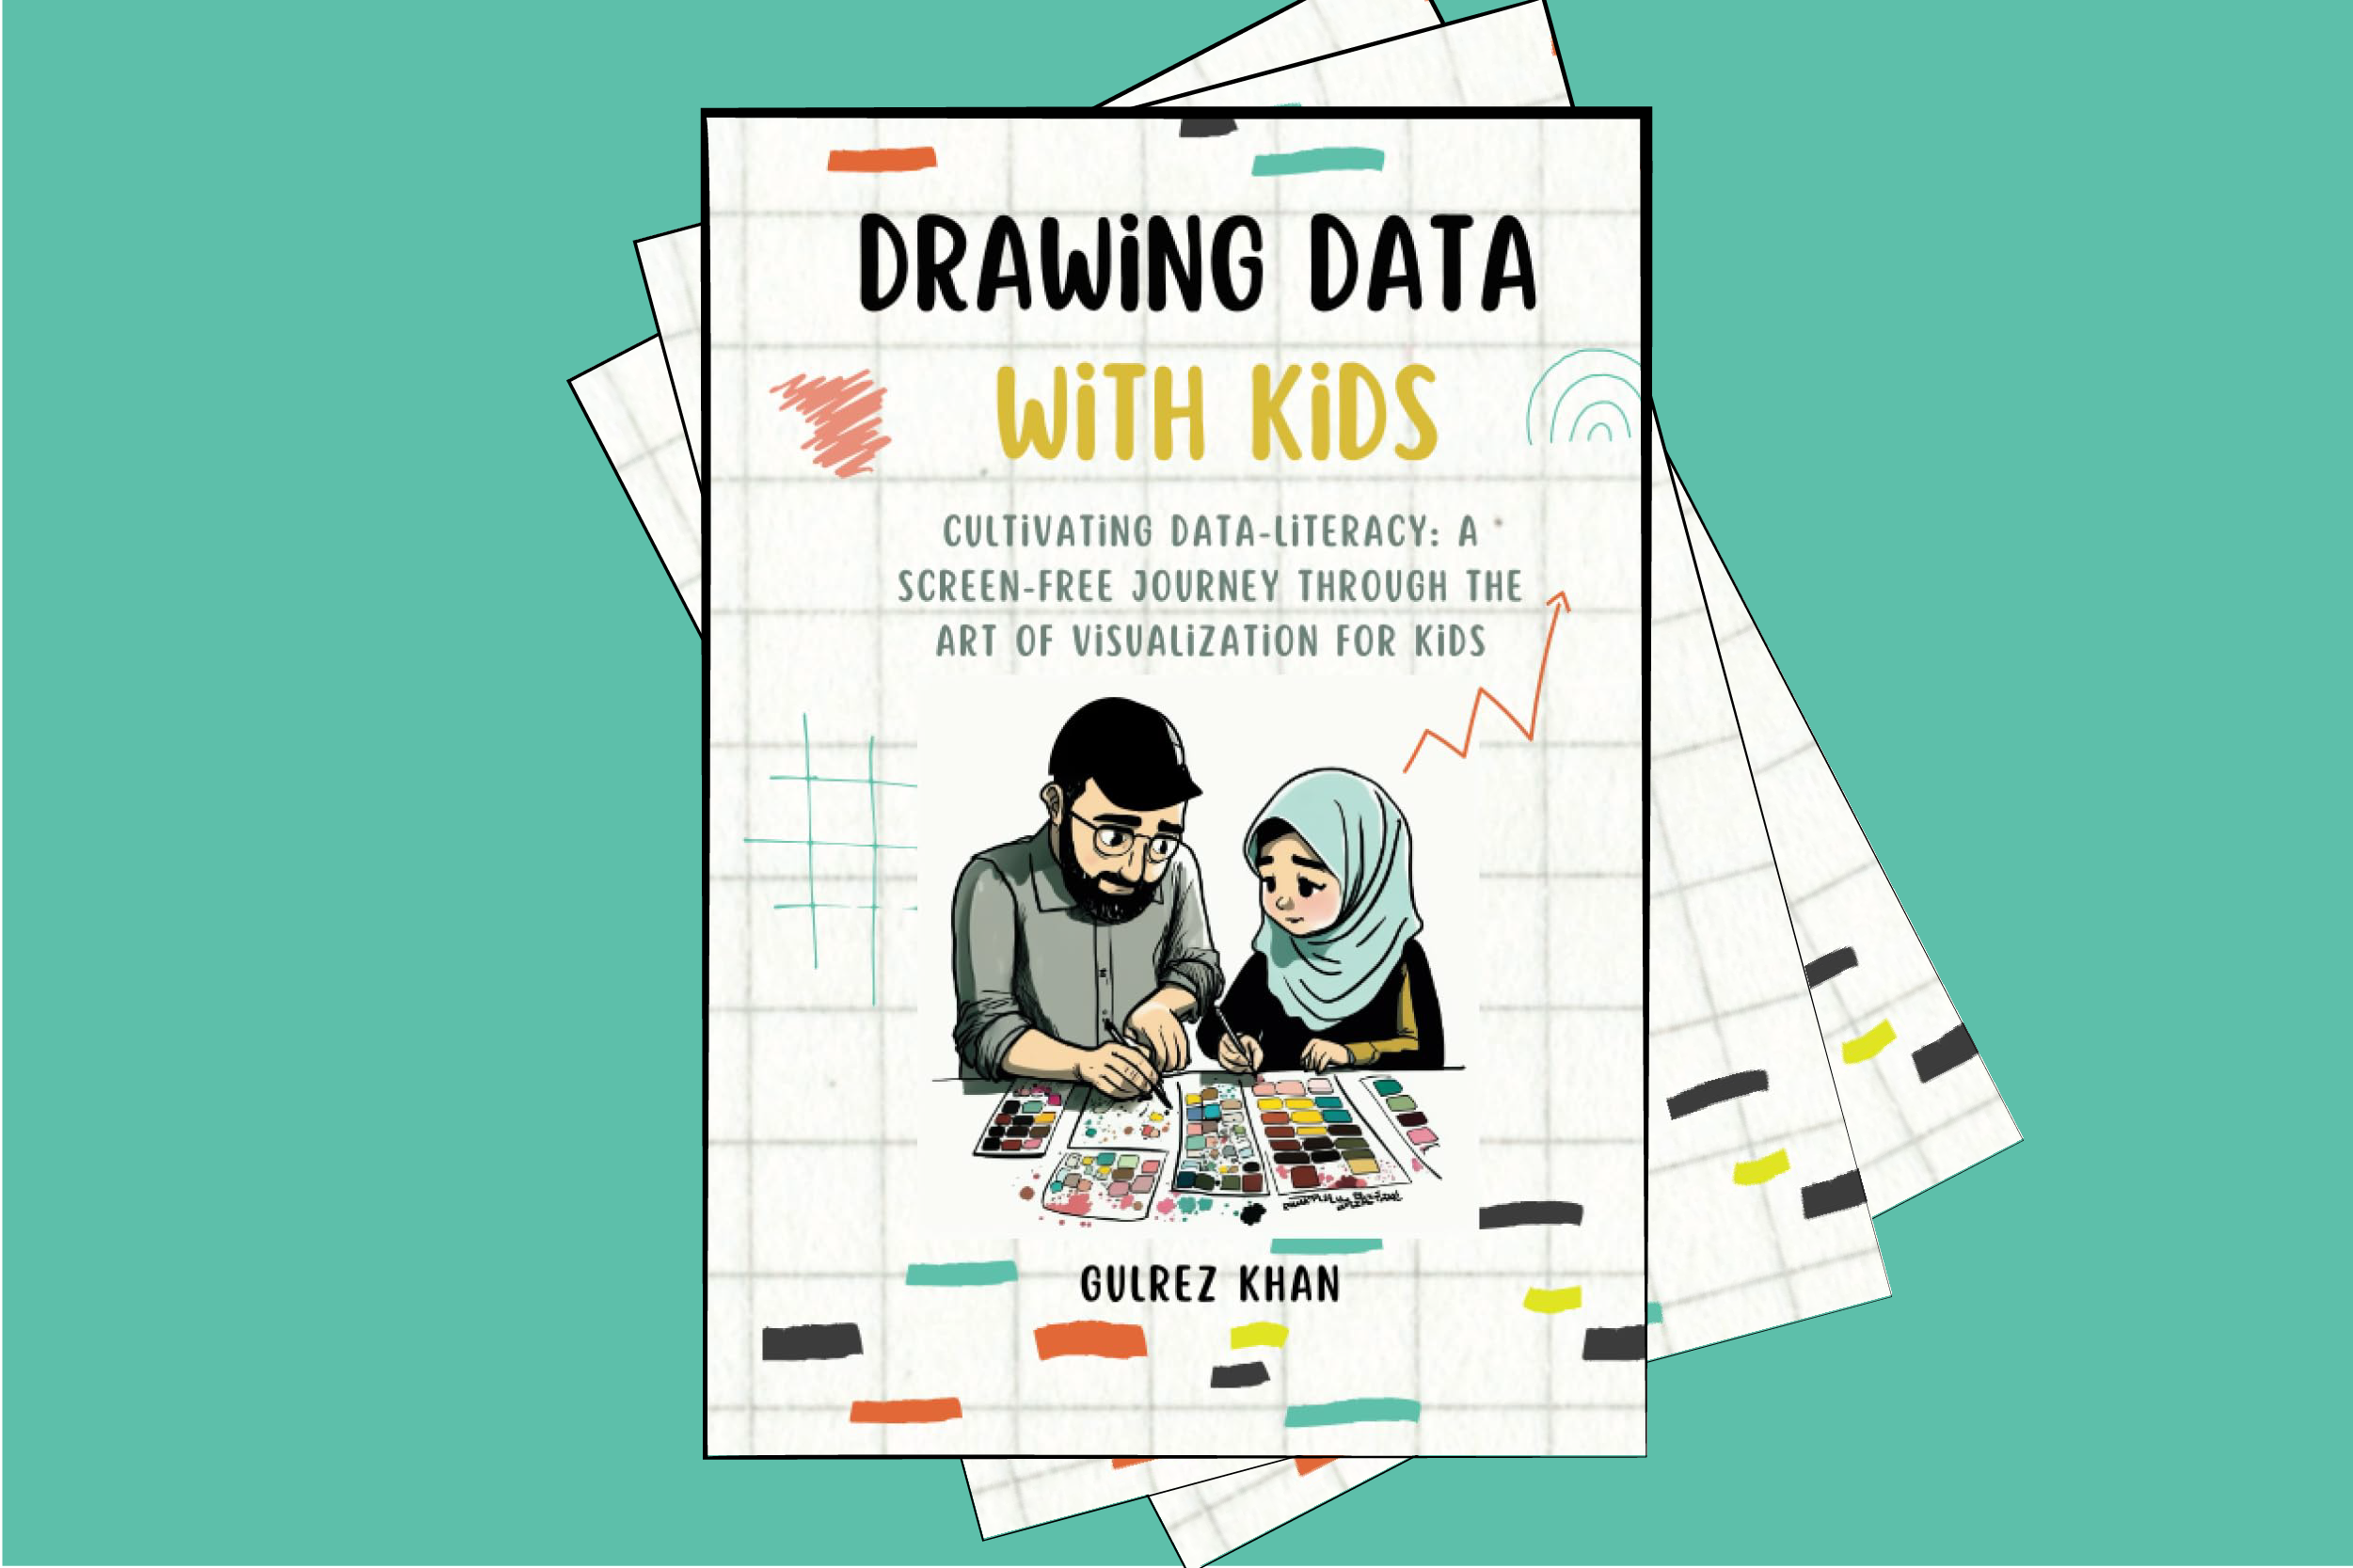 Book cover of Drawing Data With Kids, showing a father doing art with a young girl in a green headscarf